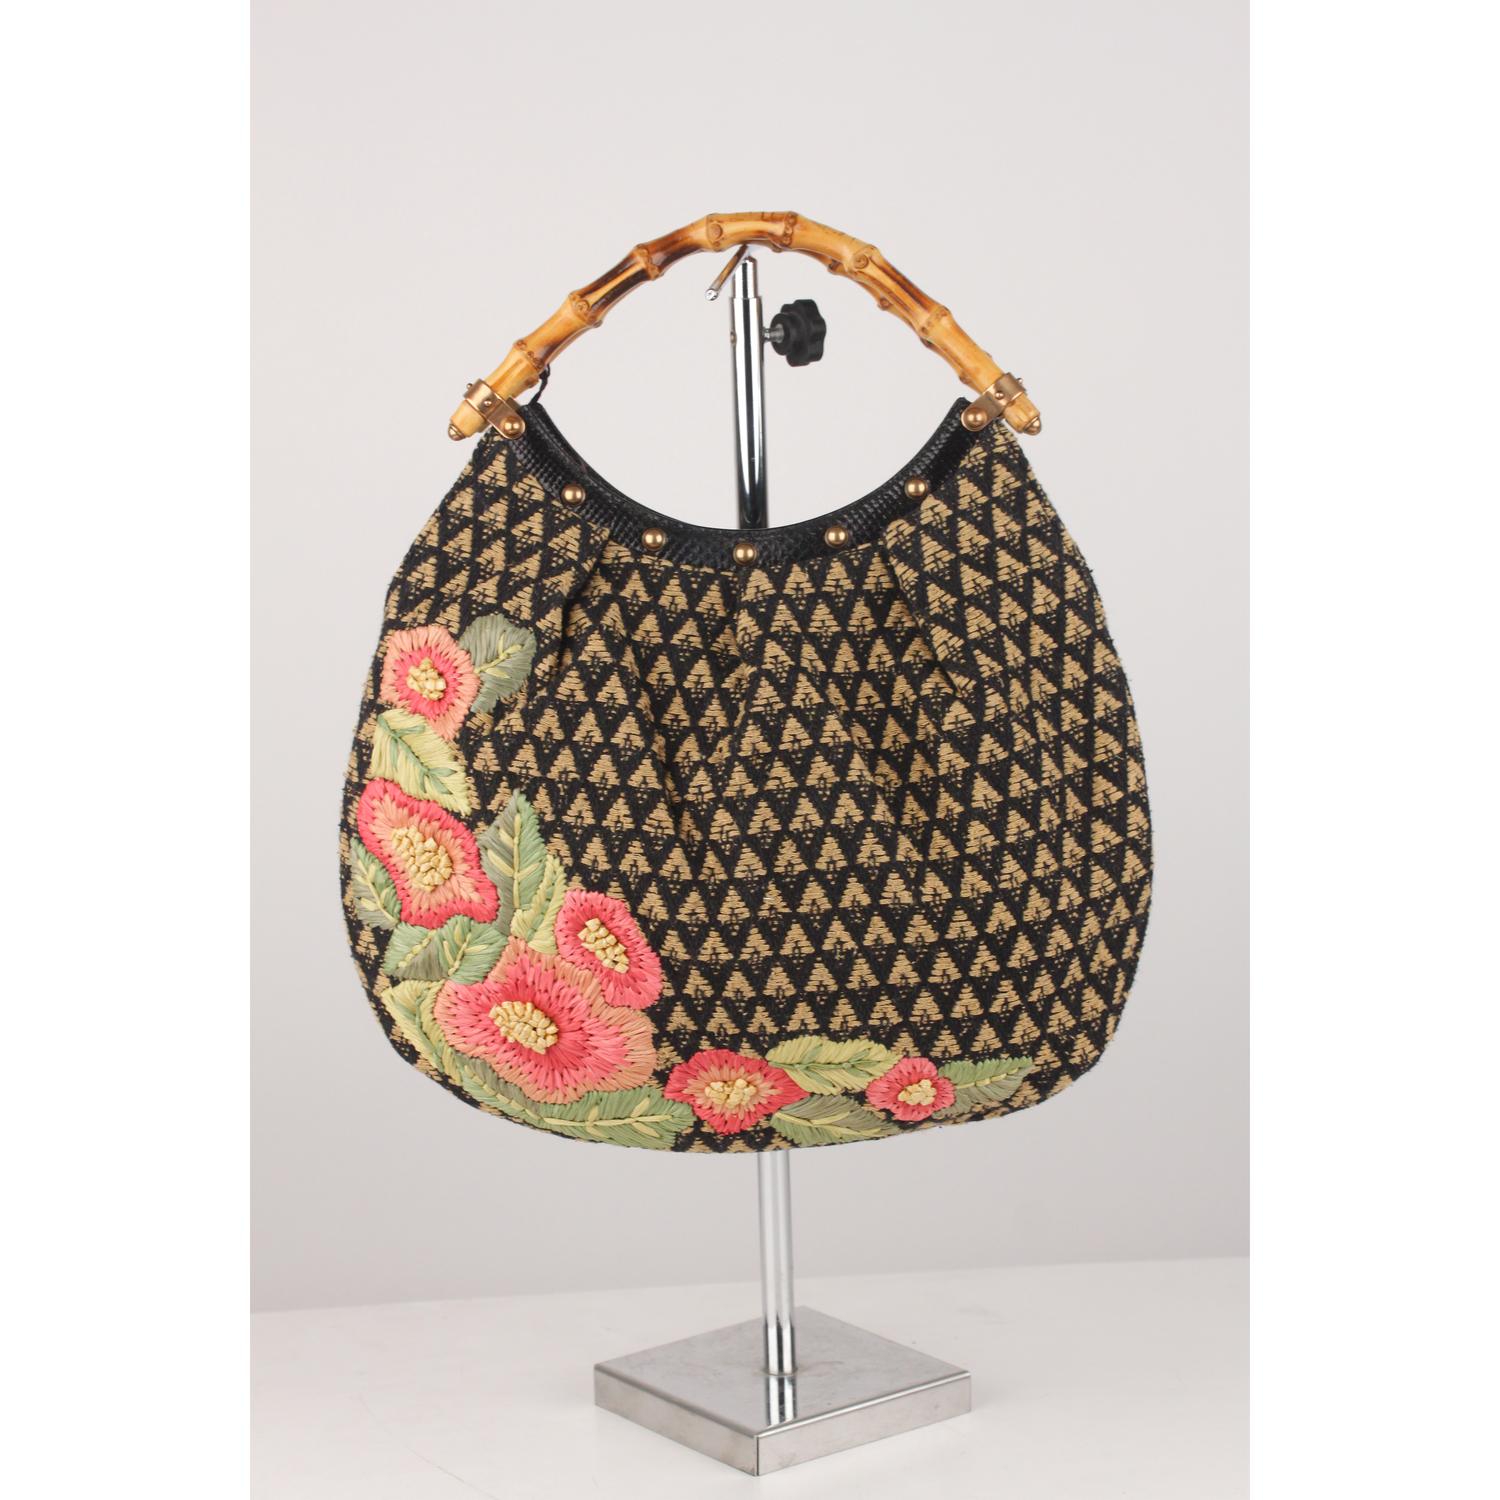 - Gucci limited edition hobo bag with bamboo handles
- Embroidered raffia flowers on canvas 
- Black leather trim on the opening with rose gold studs
- Open top
- Turquoise canvas lining 
- 1 side open pocket
- GUCCI - Made in Italy' tag inside